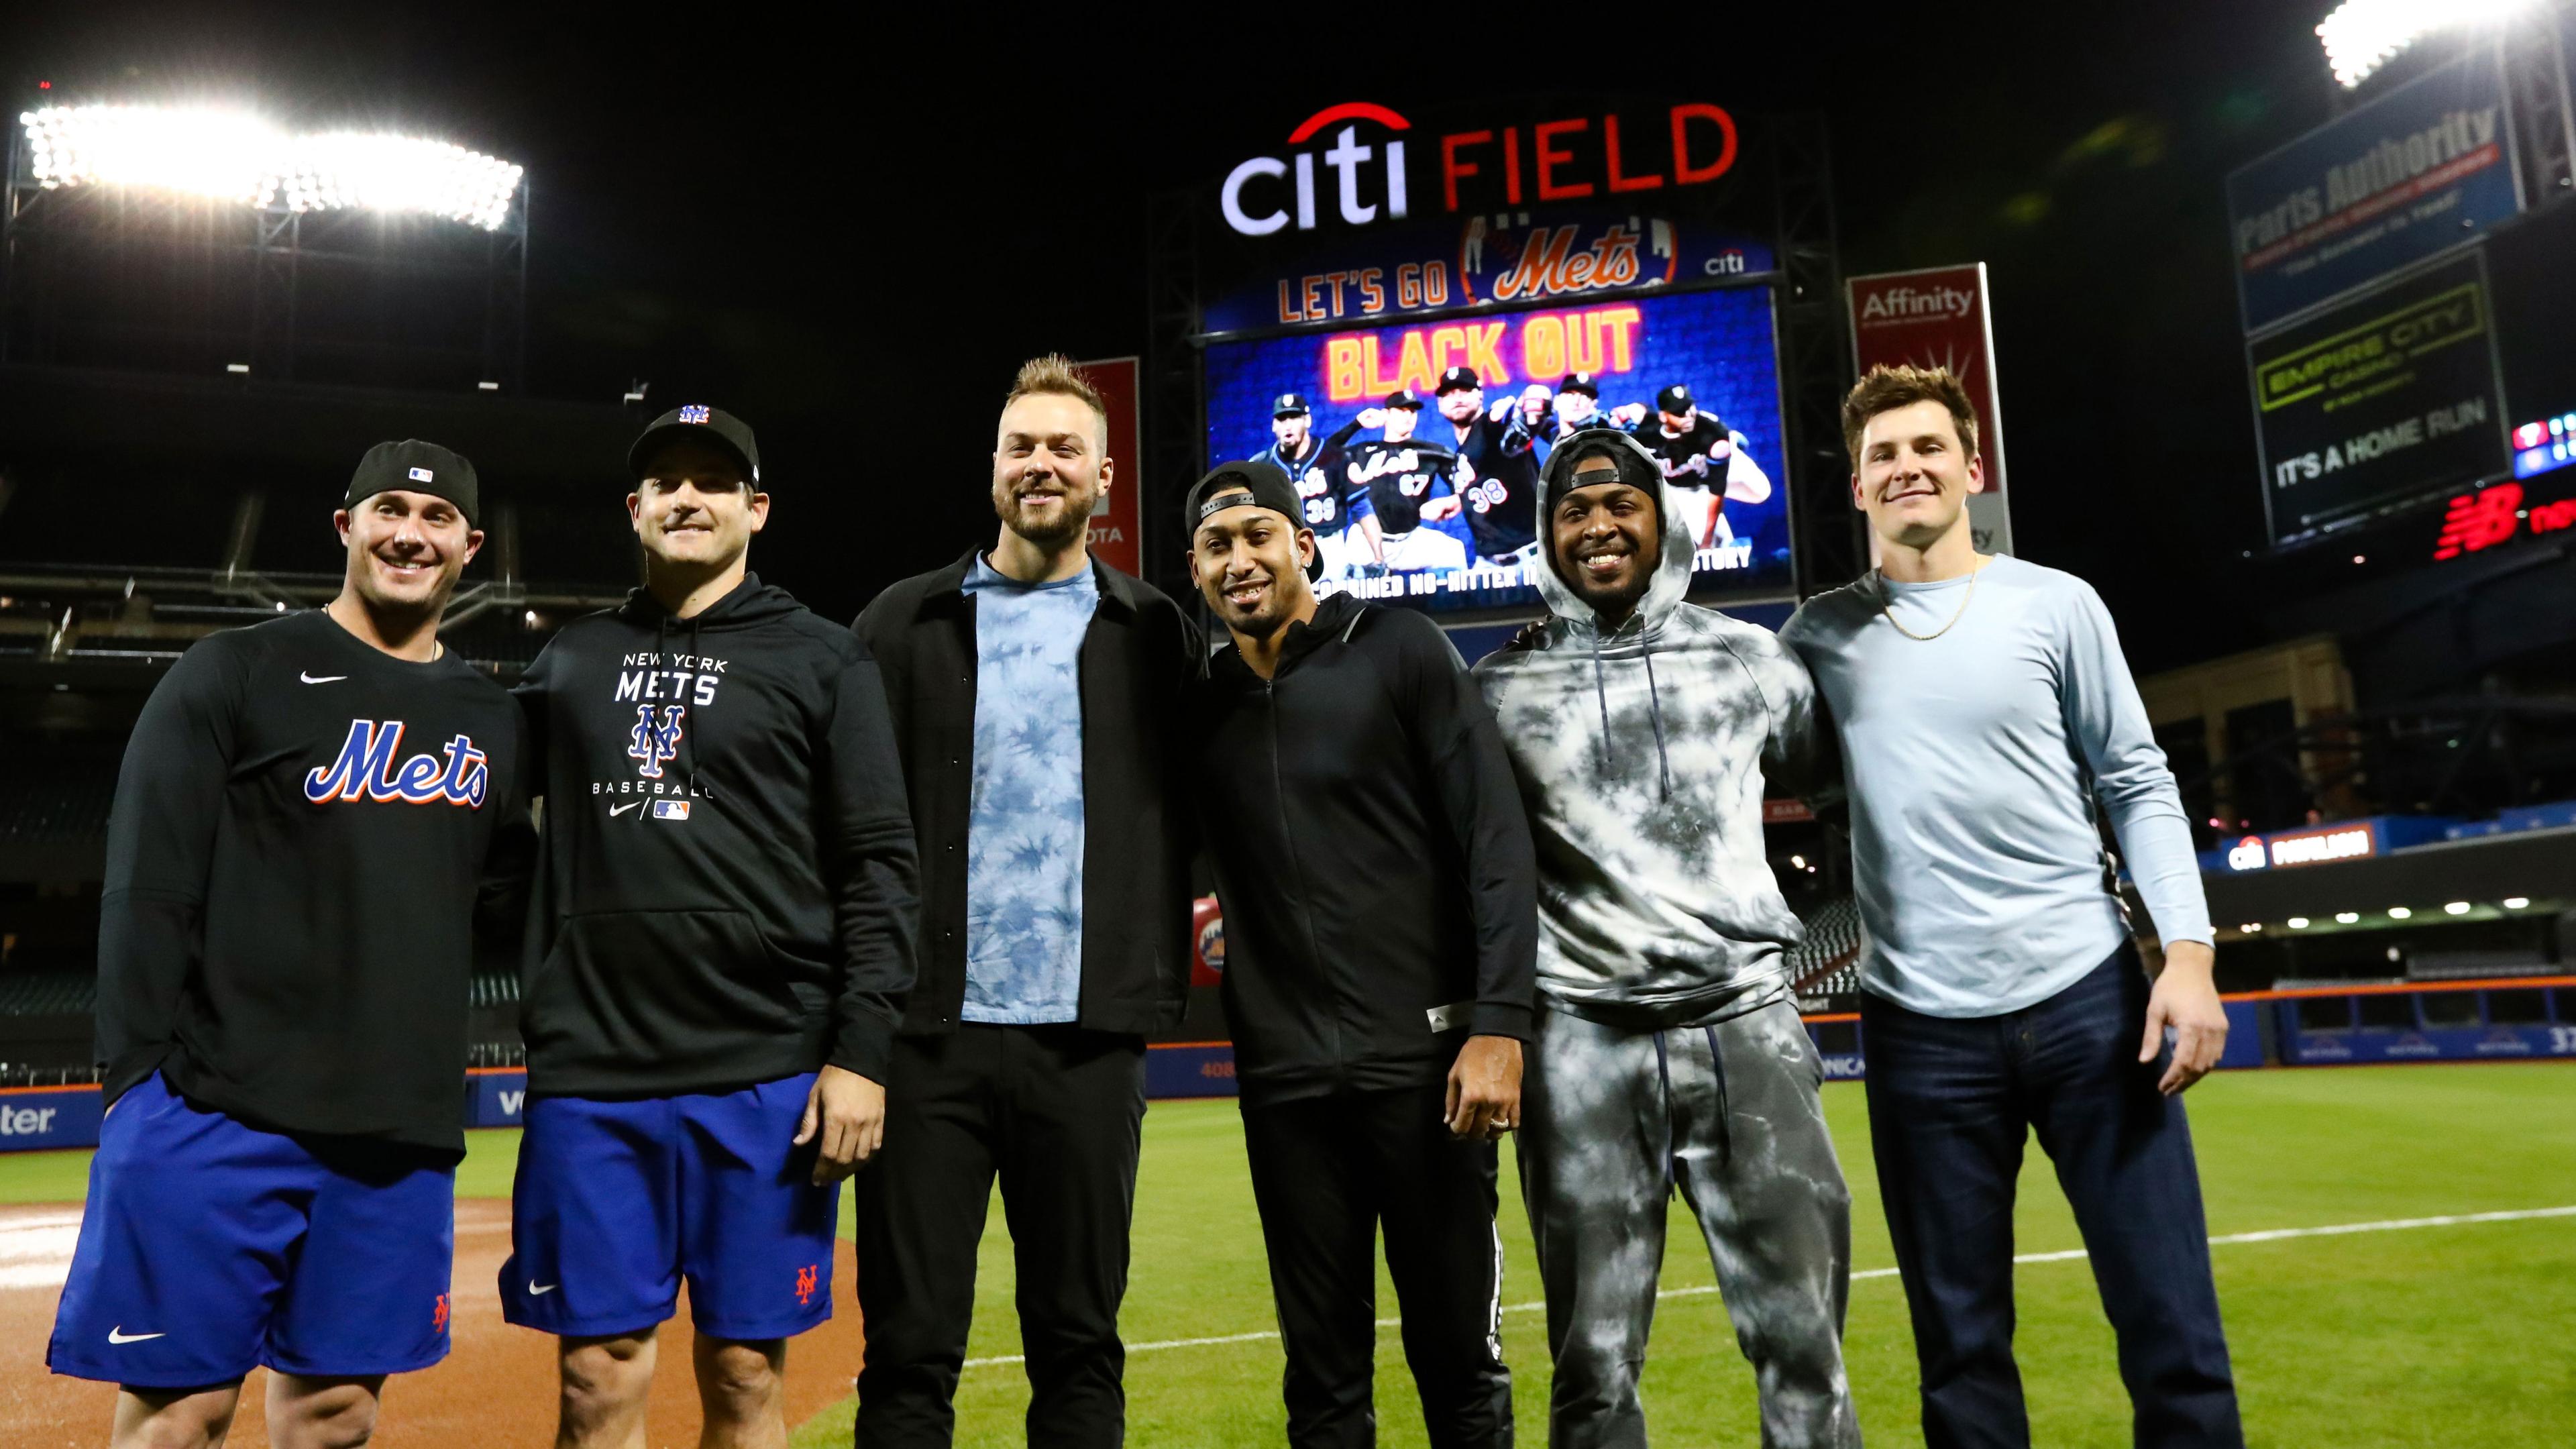 Apr 29, 2022; New York City, New York, USA; New York Mets catcher James McCann (33), relief pitcher Seth Lugo (67), relief pitcher Tylor Megill (38), relief pitcher Edwin Diaz (39), relief pitcher Joely Rodriguez (30), and relief pitcher Drew Smith (62) pose for a photo in front of the video board after a combined no-hitter against the Philadelphia Phillies at Citi Field. / Jessica Alcheh-USA TODAY Sports